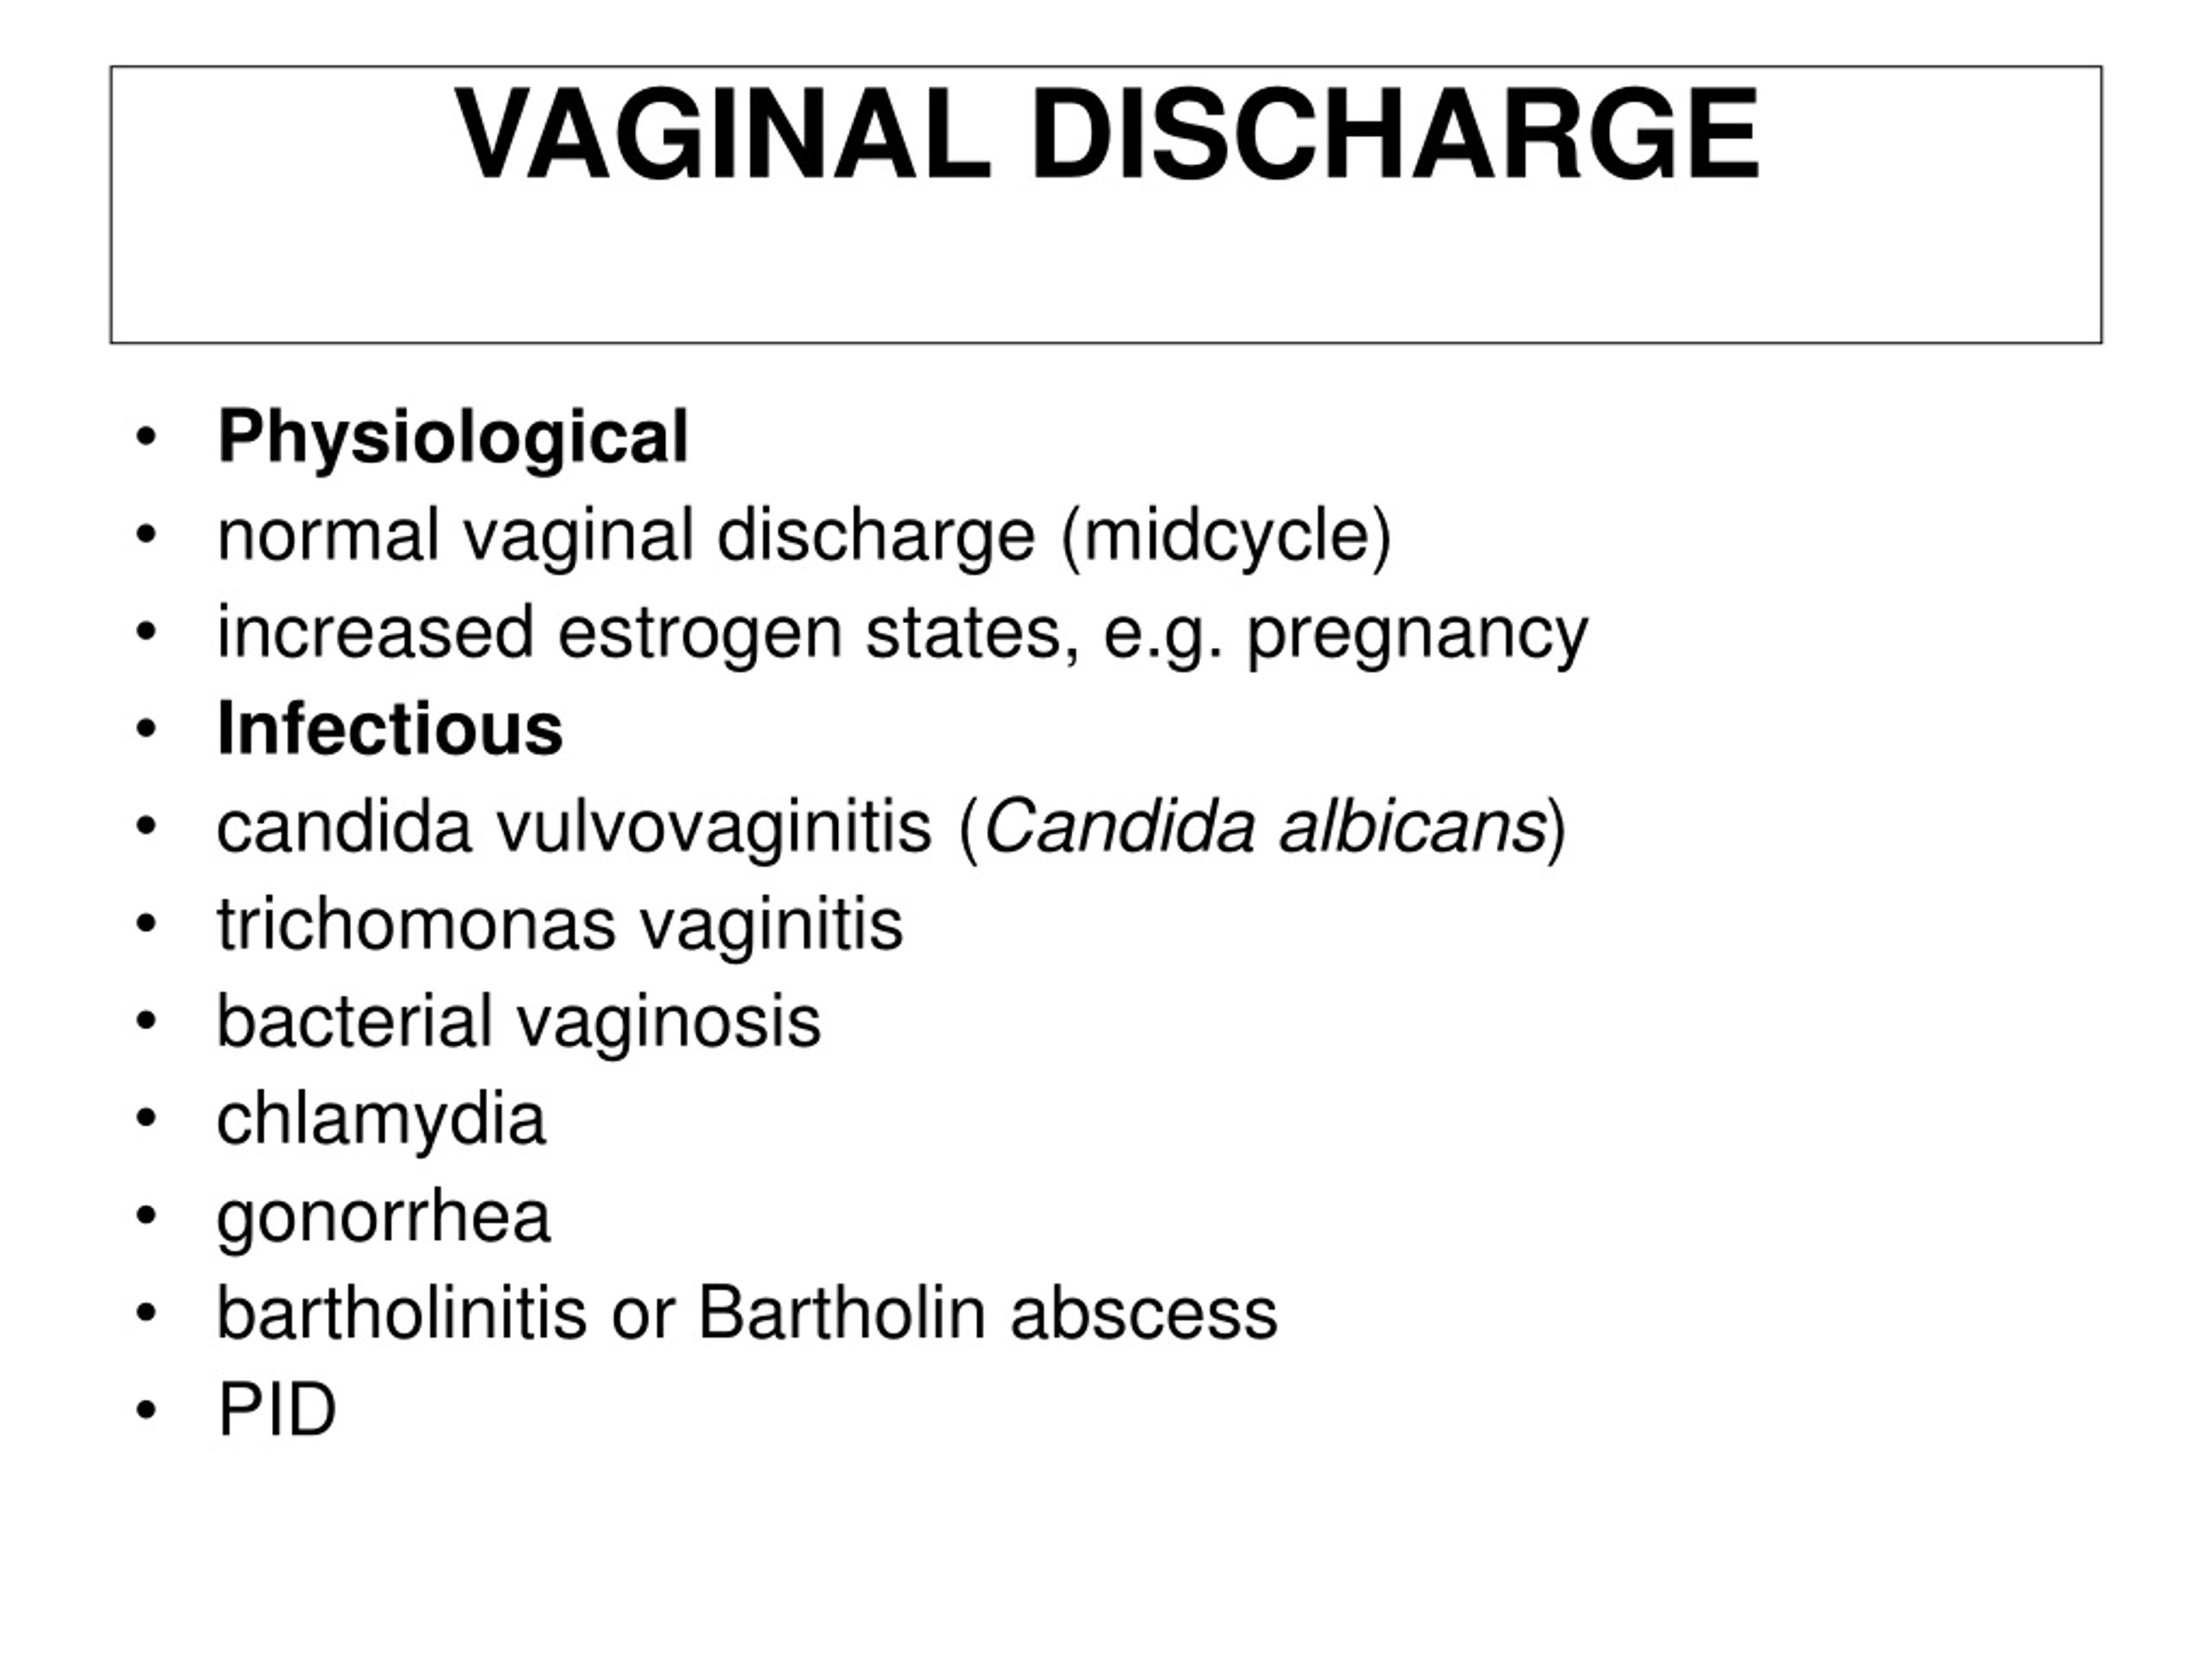 Ppt Vaginal Discharge Powerpoint Presentation Free Download Id9098717 6163